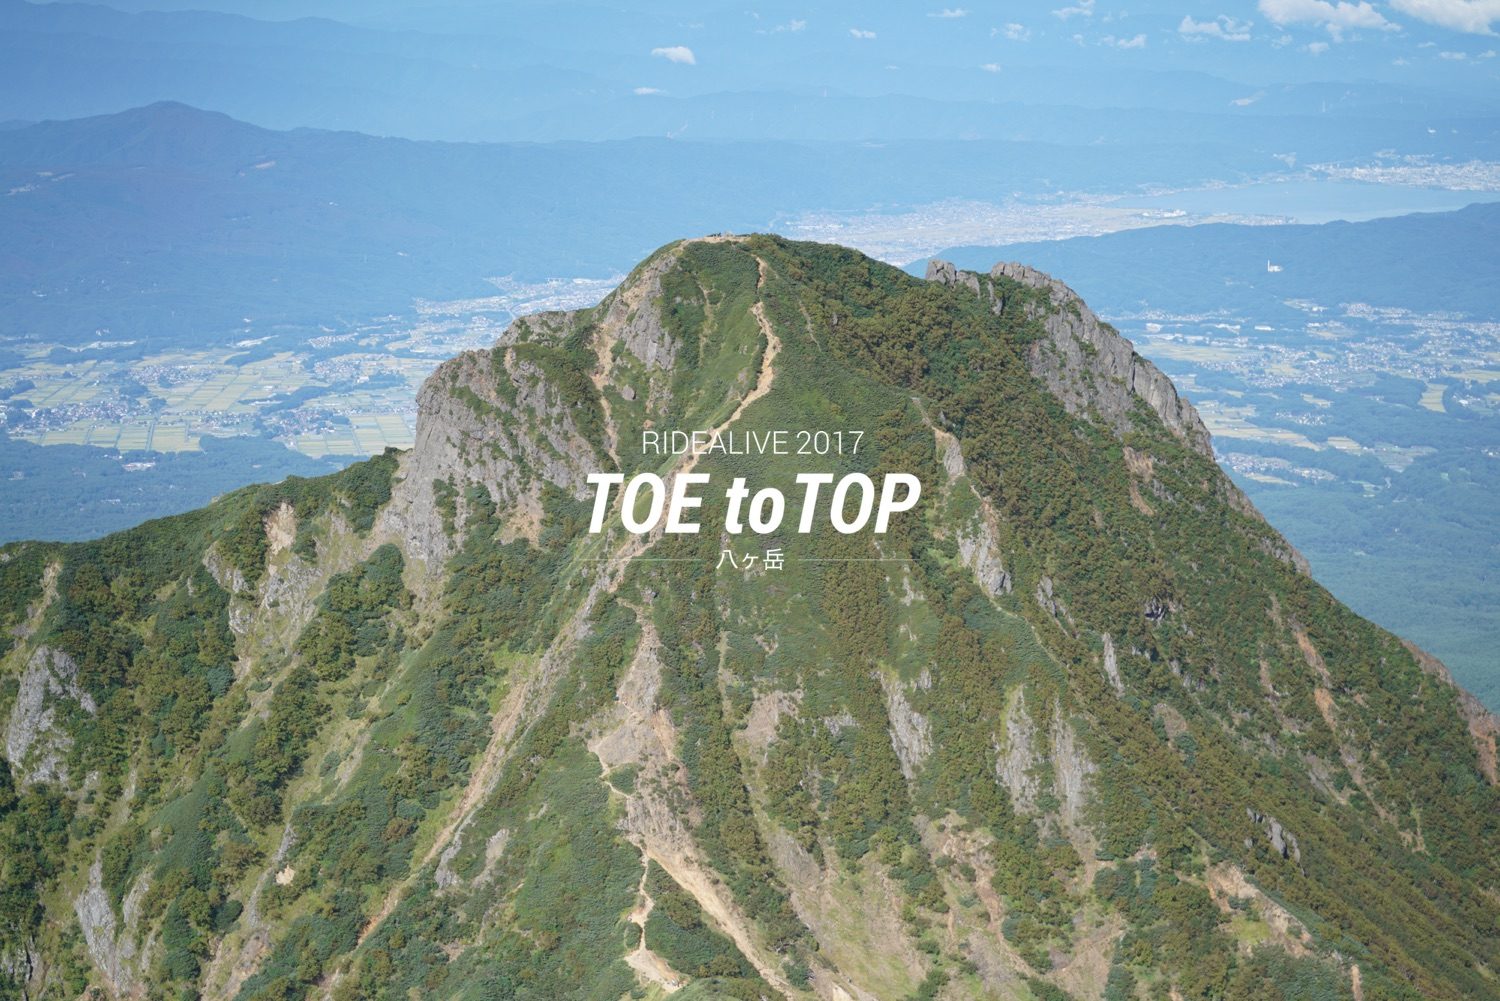 "TOE to TOP"